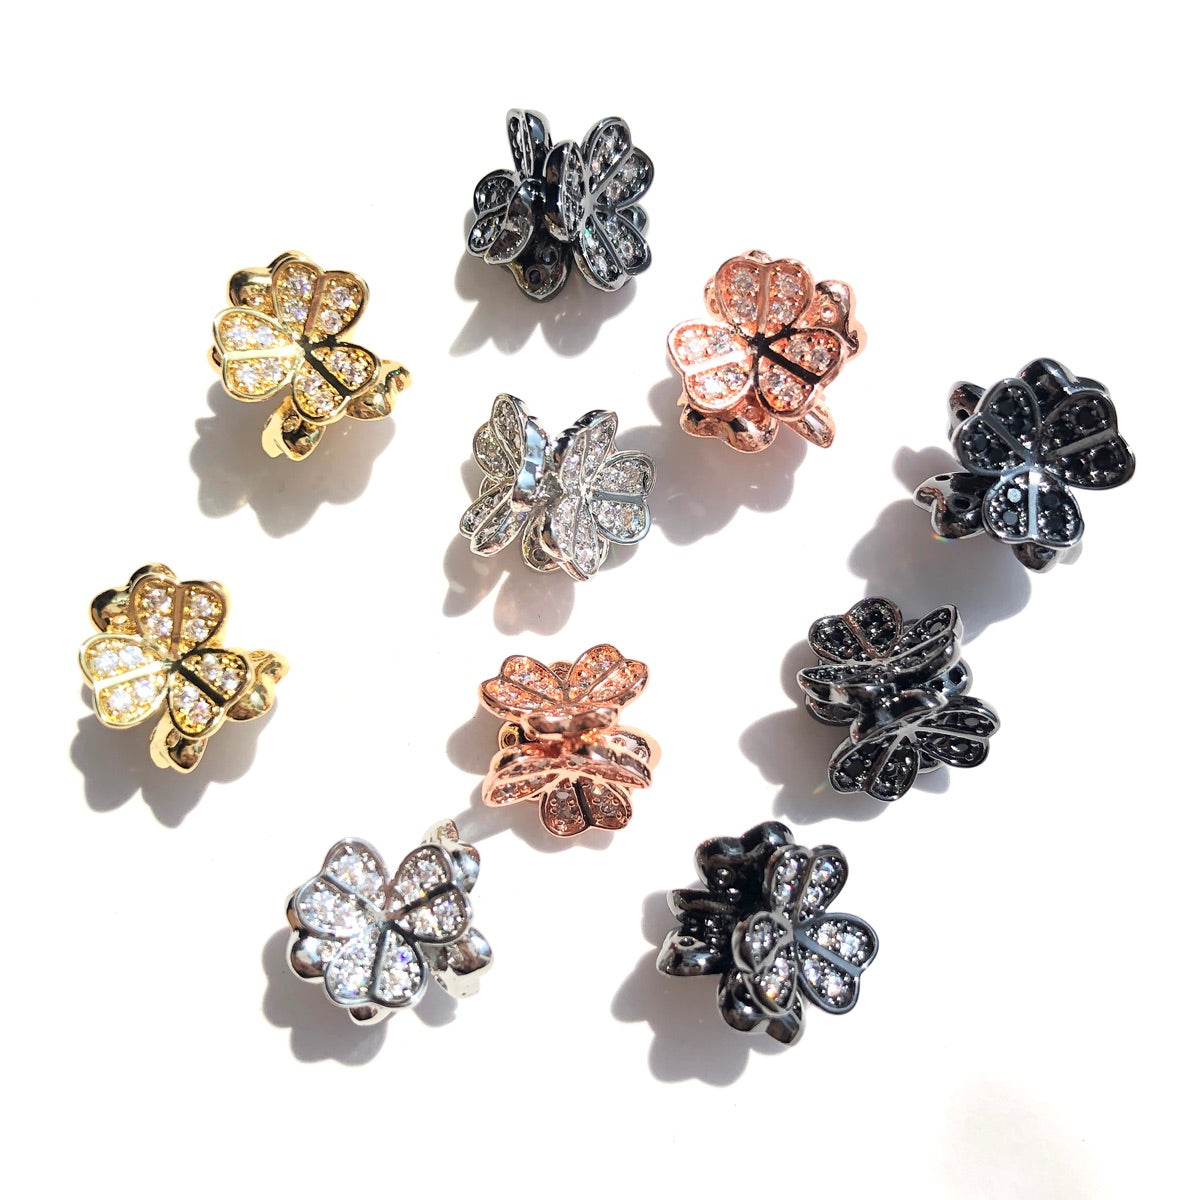 10-20-50pcs/lot 9mm CZ Paved Clover Flower Spacers Mix Colors CZ Paved Spacers New Spacers Arrivals Wholesale Charms Beads Beyond